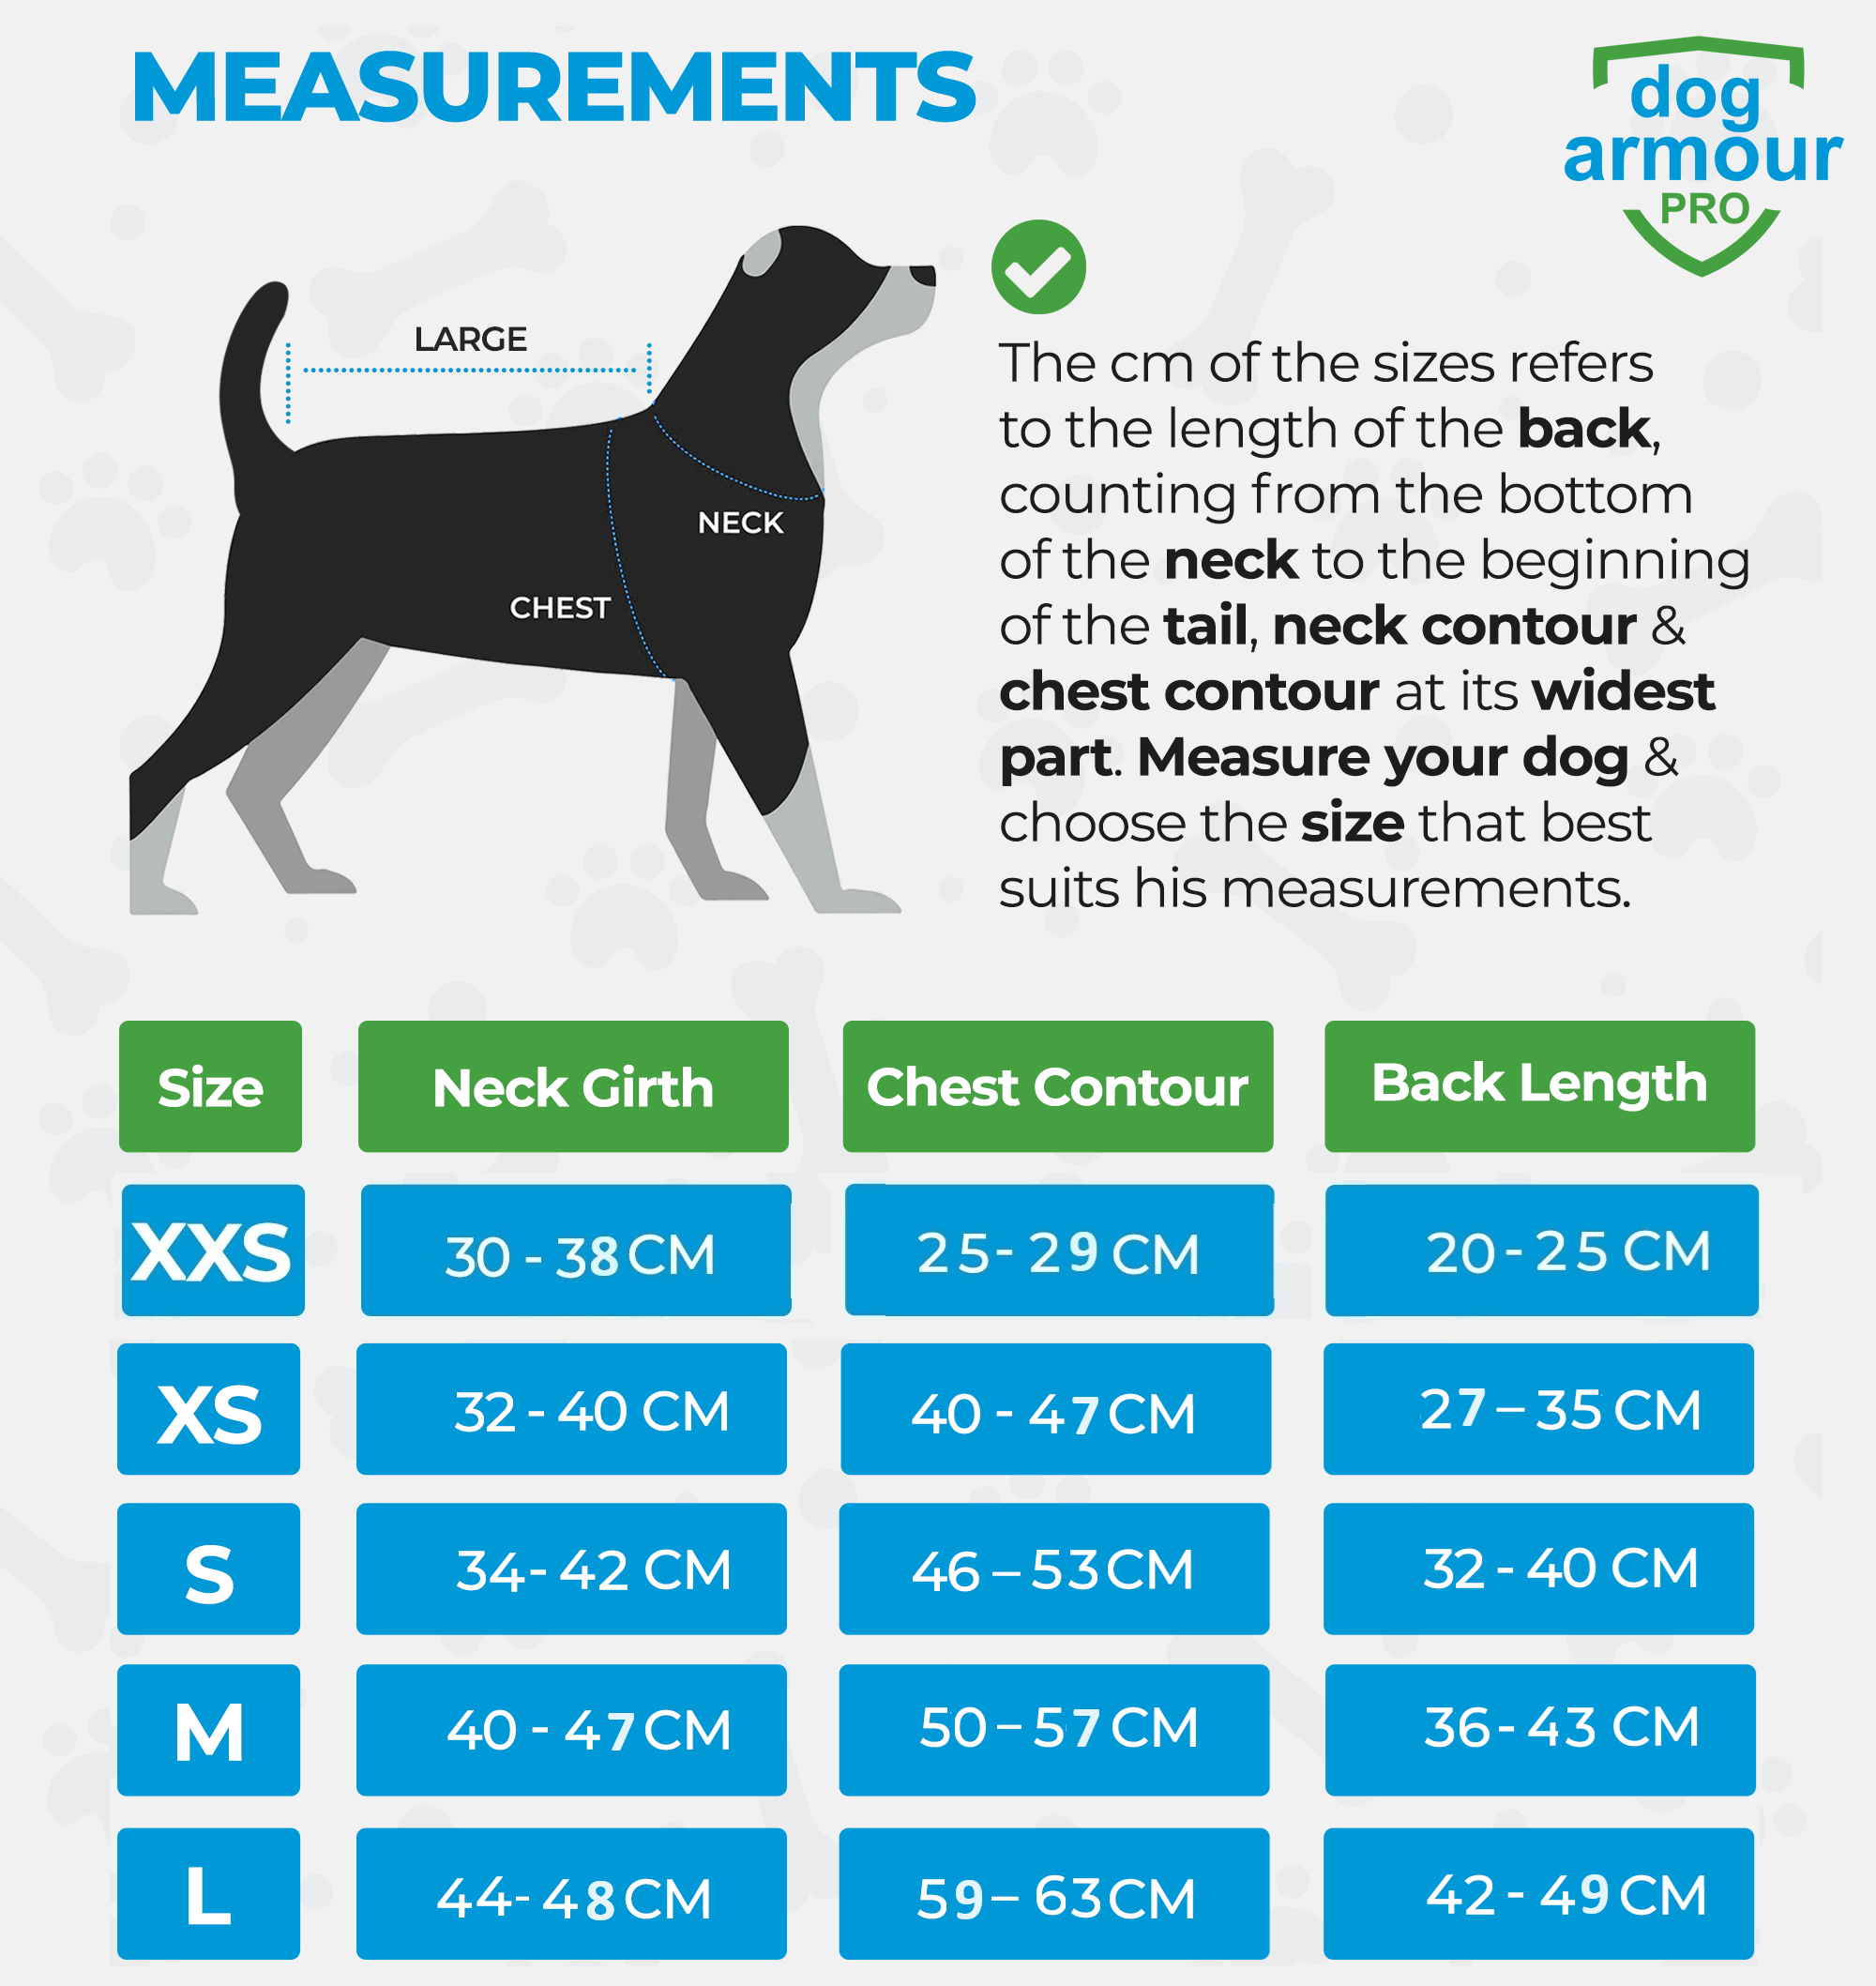 dog armour PRO - Size Guide in centimeters